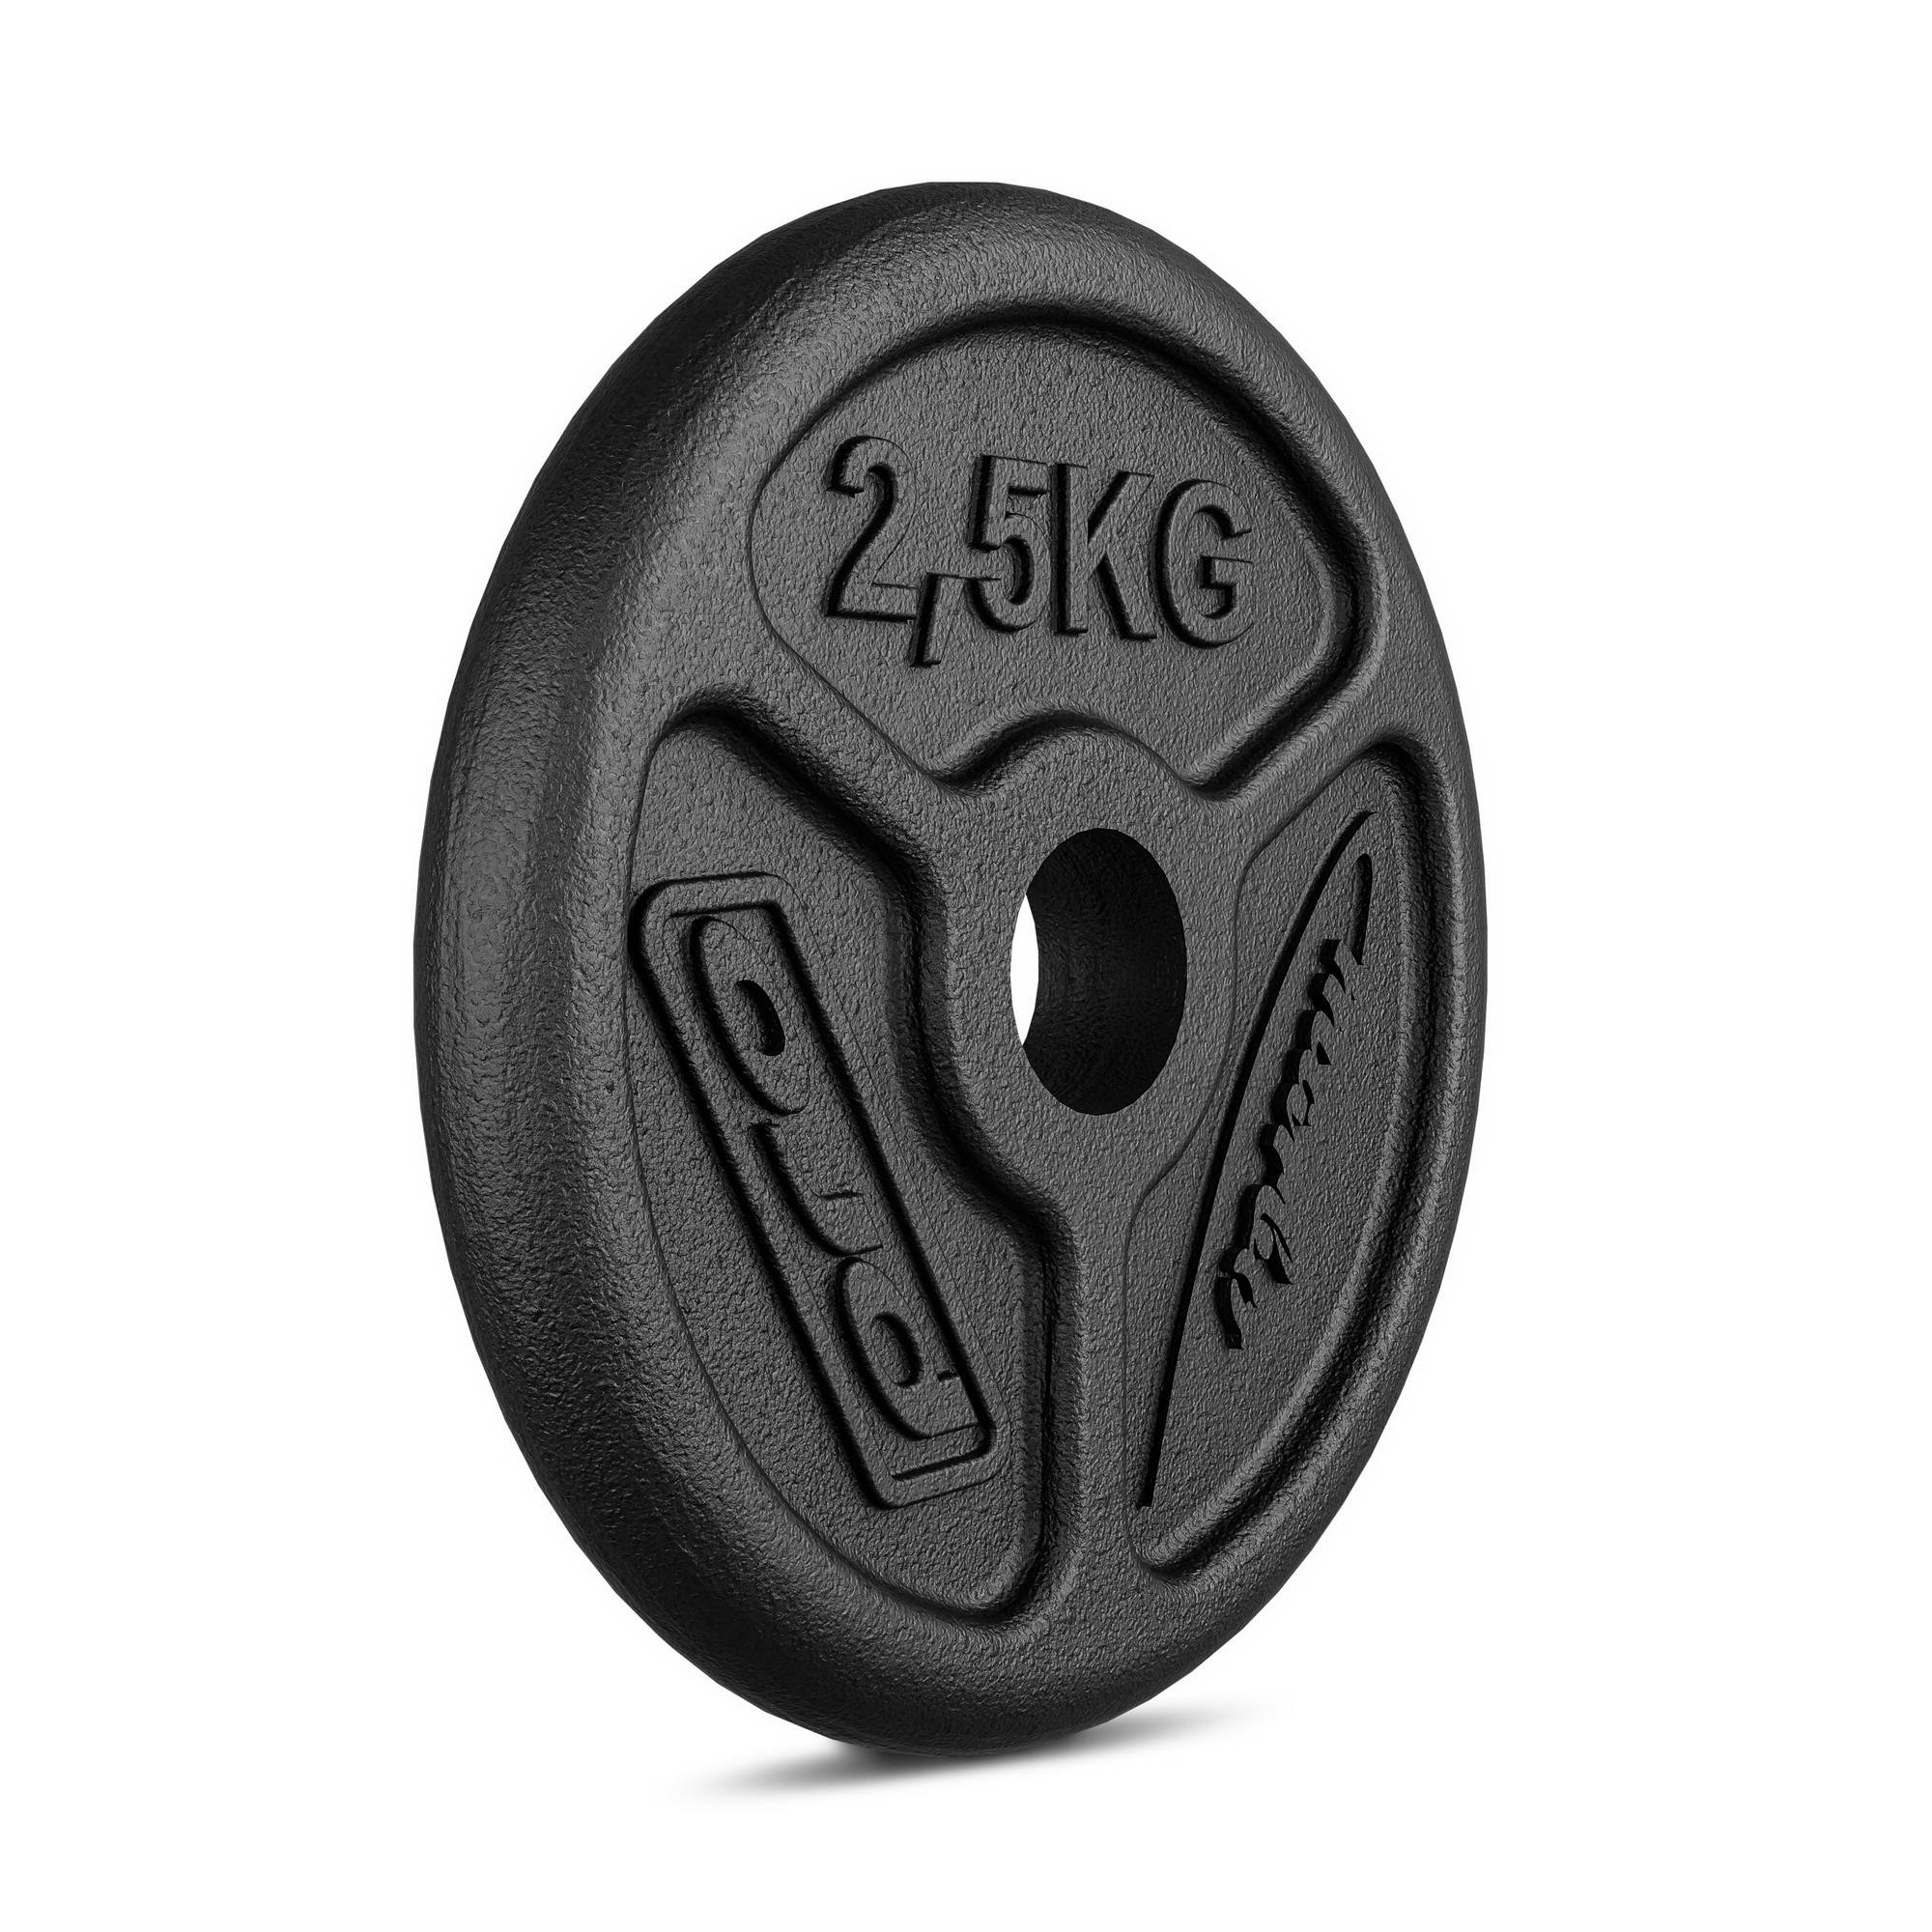 Standard iron discs slim 2,5 Sport 2023 and mm kg Week Bars Weight Standard \\ kg plates Plates Cyber 2.5 \\ | 2023 weight with Weight Marbo ø31 - bore Black MW-O2,5-slim plates Week